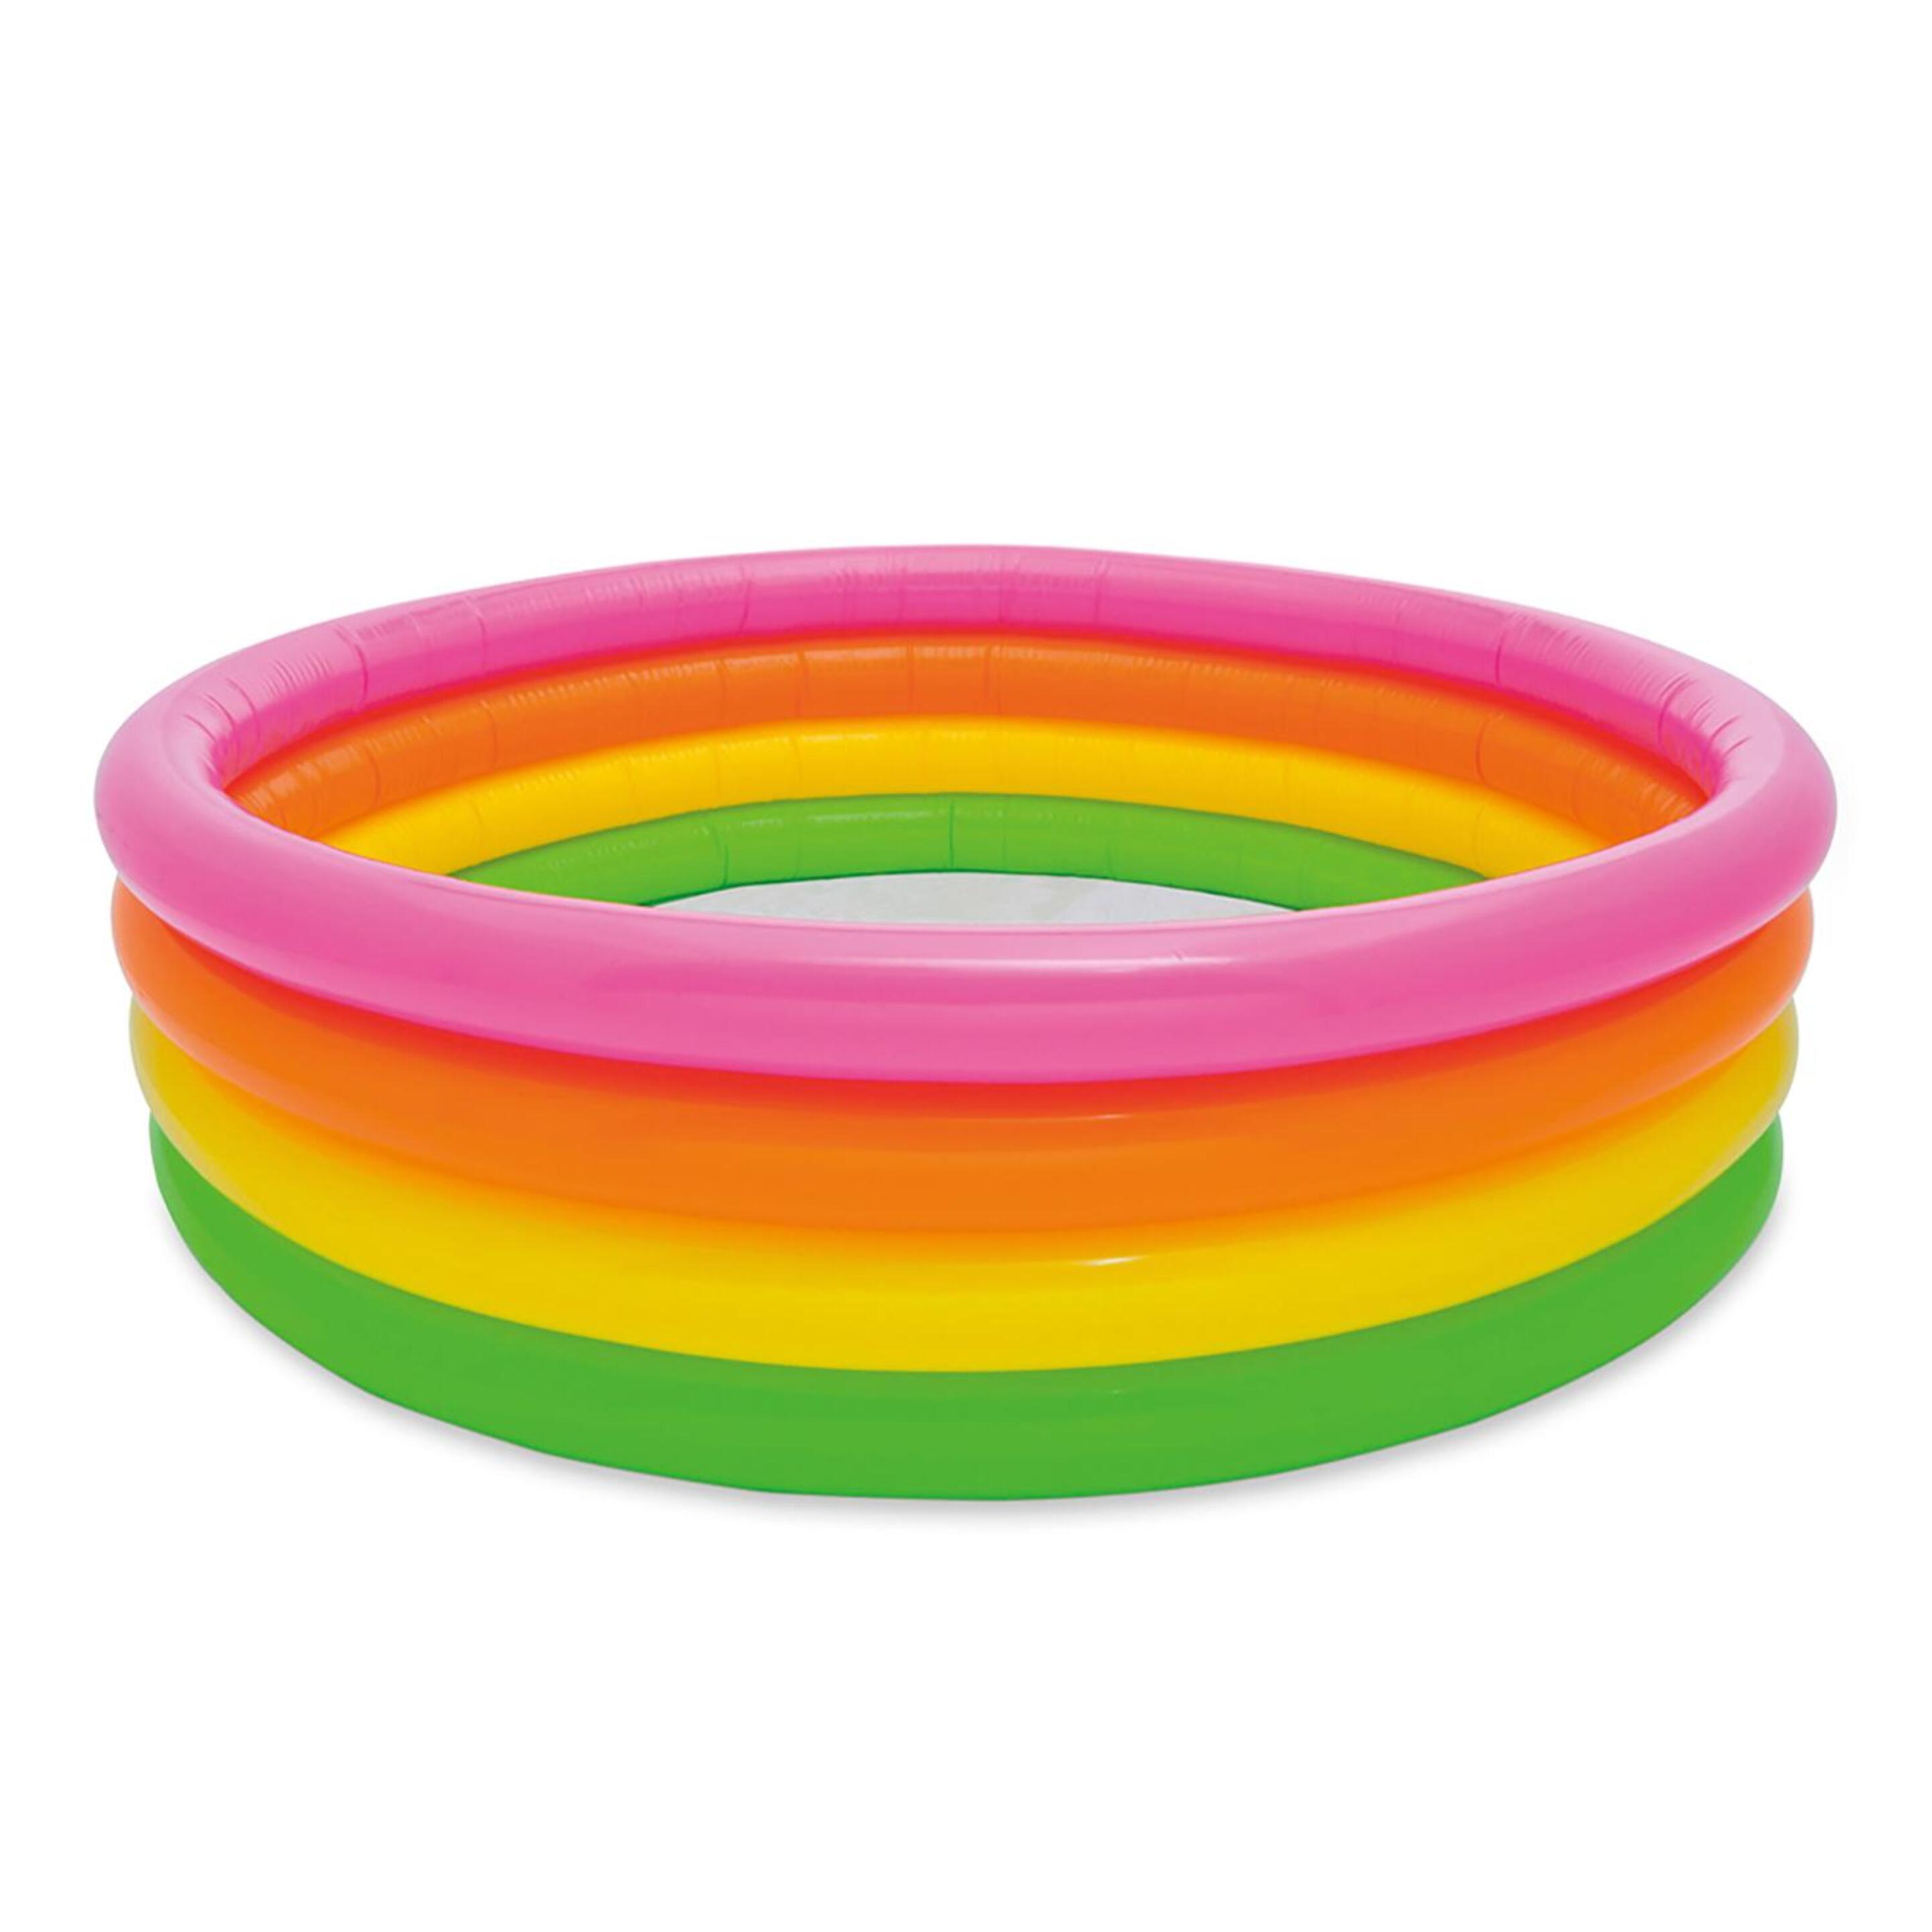 Intex Piscina Inflable Sunset 4 Anillos